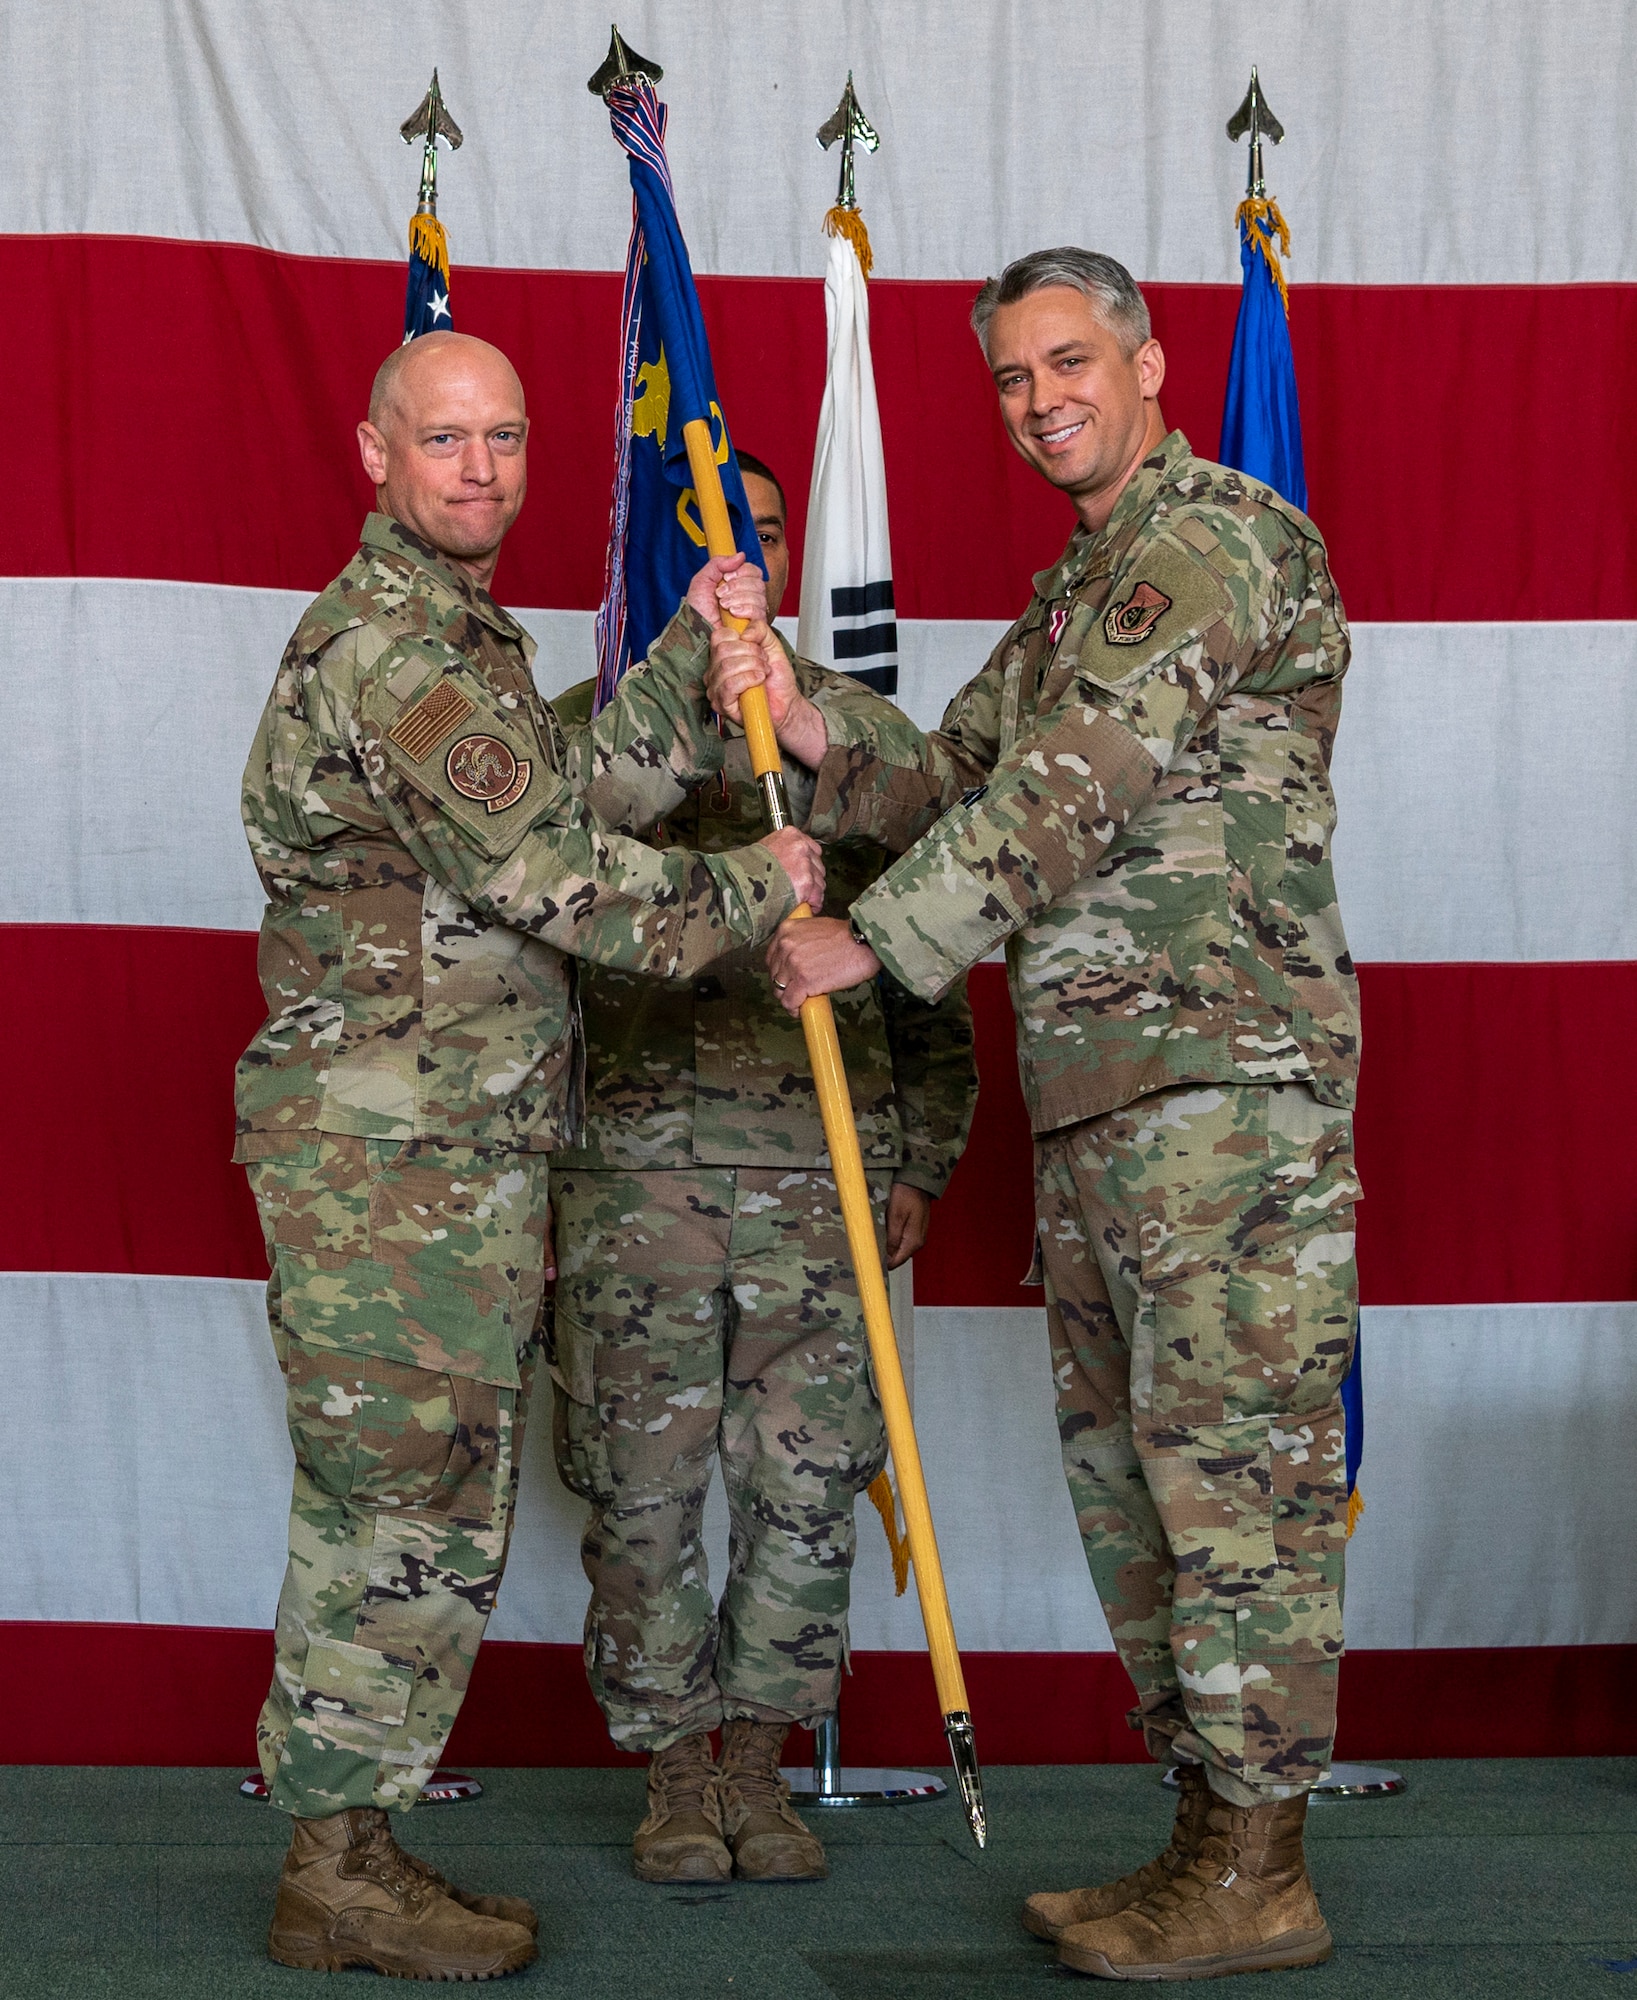 Col. Mathew Gaetke, 51st Operations Group commander, left, receives the squadron guidon from Lt. Col. William Yoakley, 51st Operations Support Squadron outgoing commander, representing his relinquishing of command over the OSS at Osan Air Base, Republic of Korea, June 7, 2022.